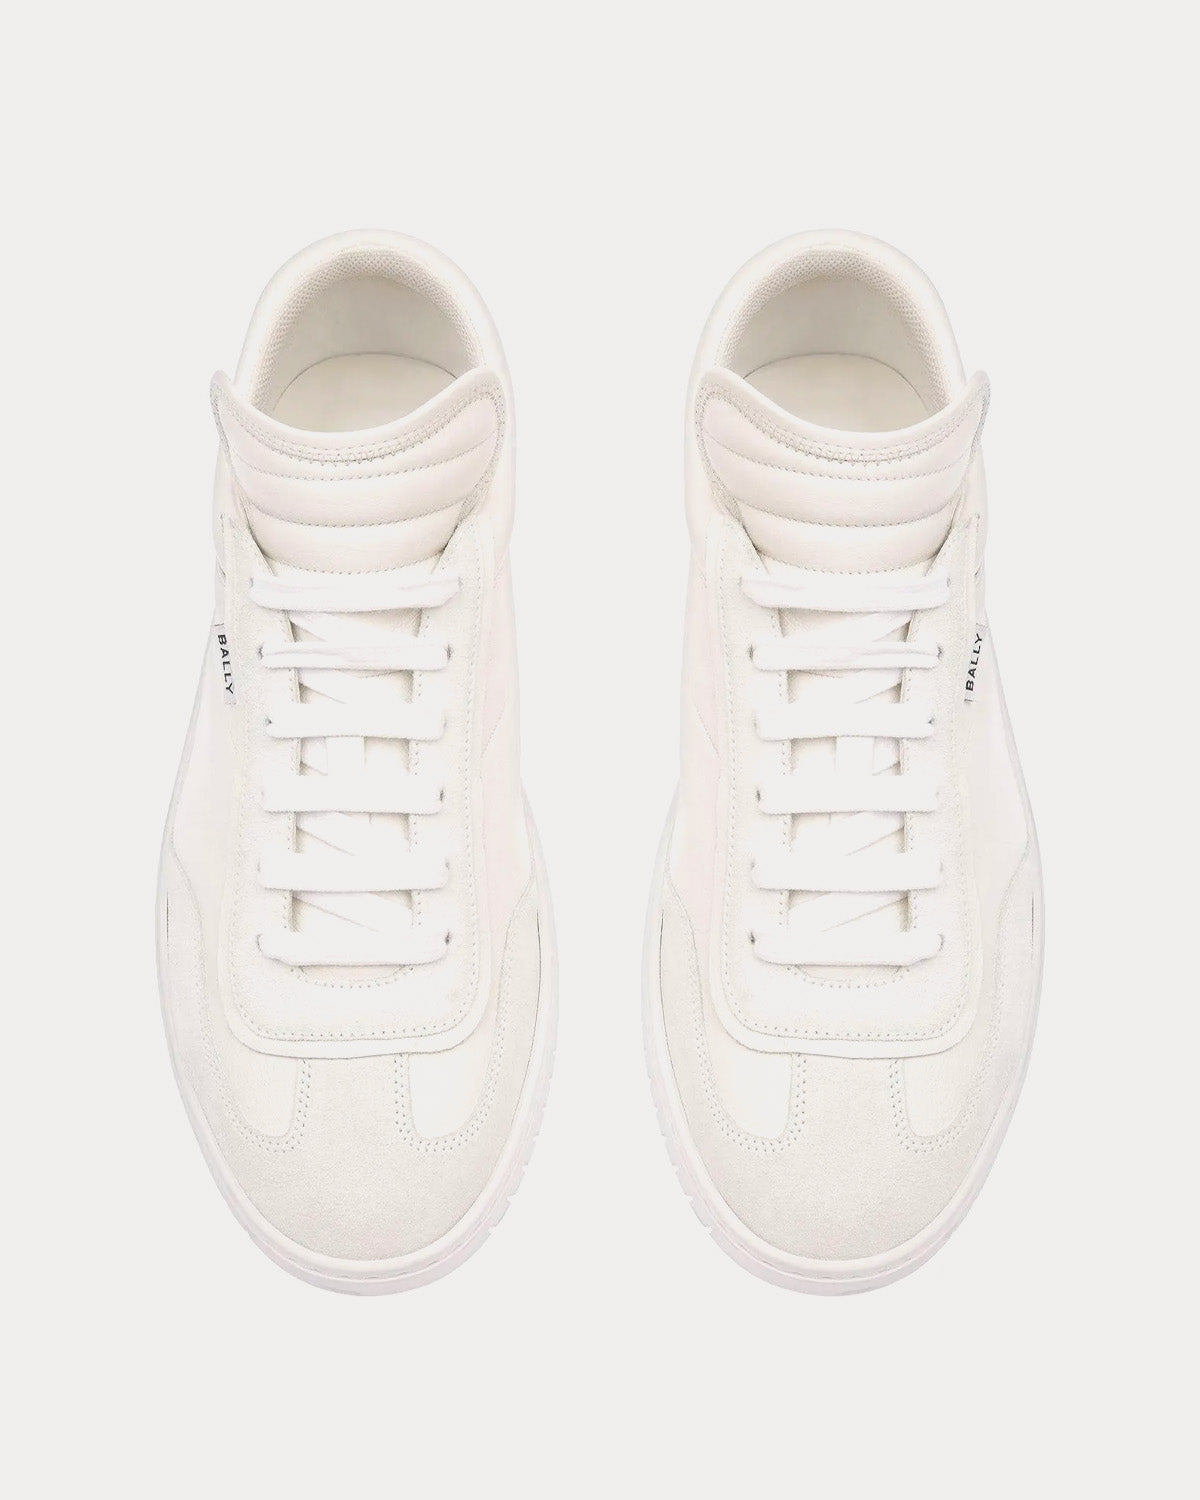 Bally - Player Leather & Suede White Low Top Sneakers